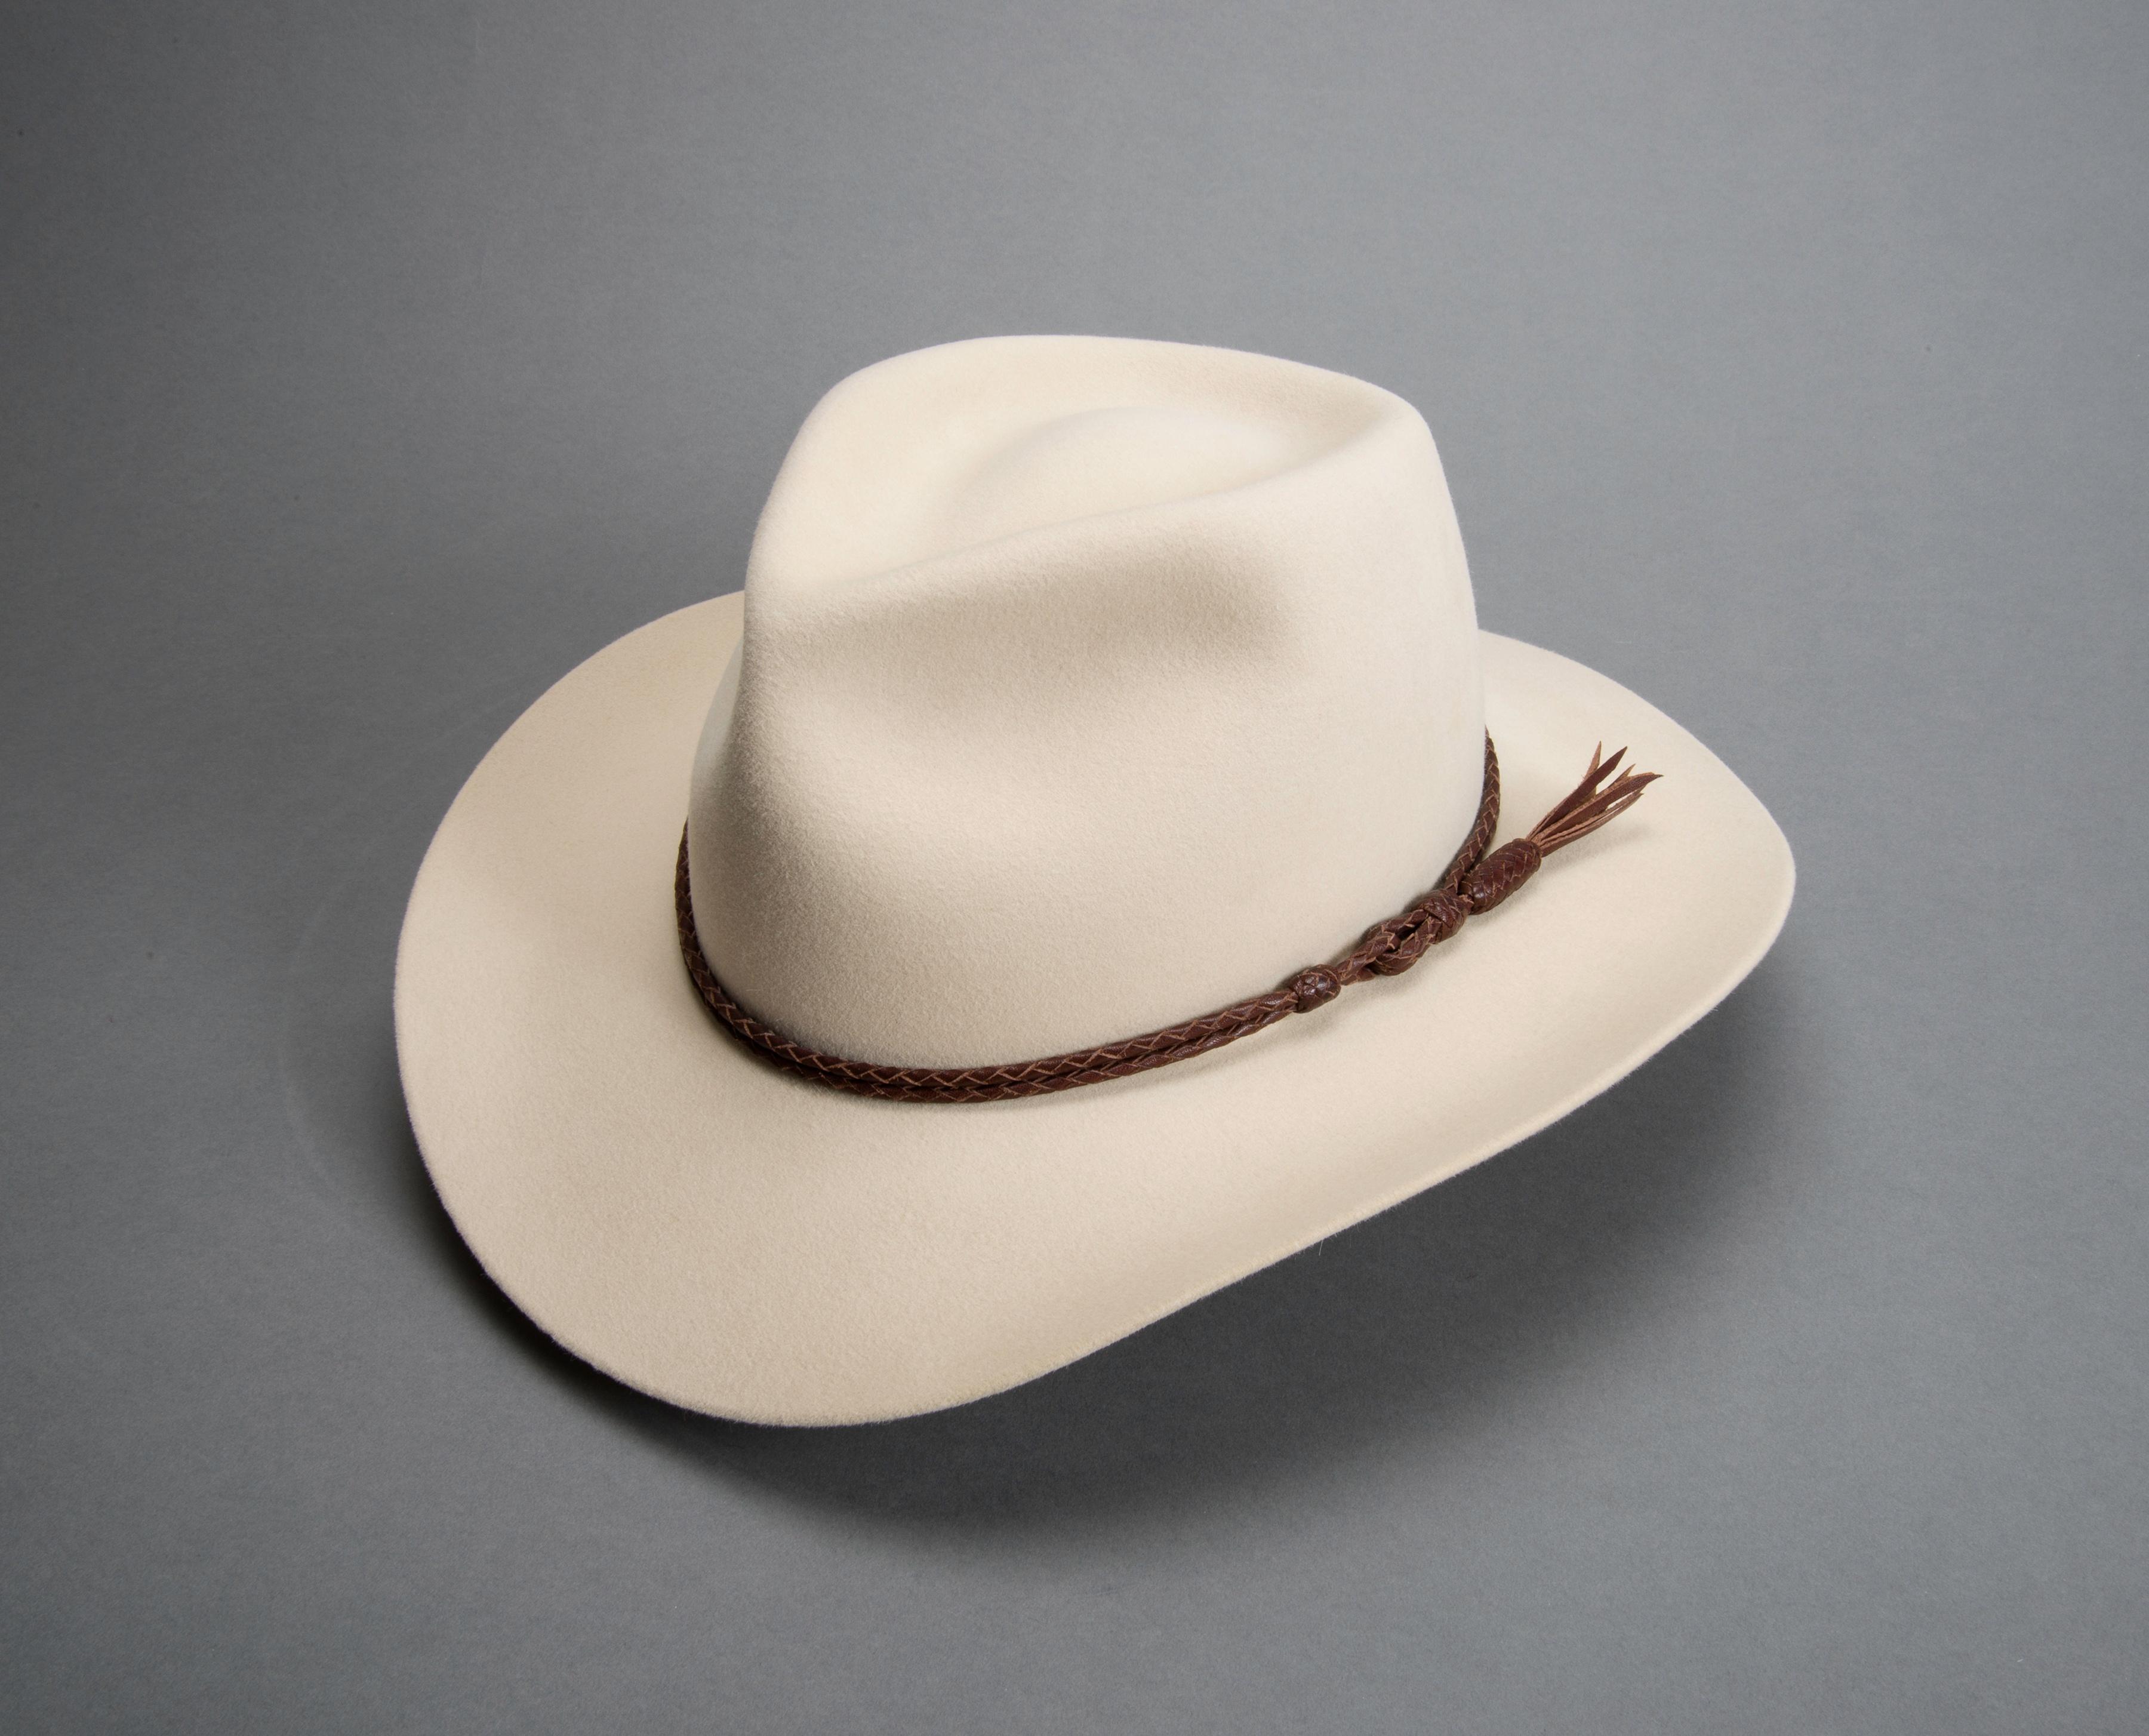 A handmade hat from the O’Farrell Hat Company in Santa Fe, New Mexico, which includes one of Mr. Storch’s hatbands.